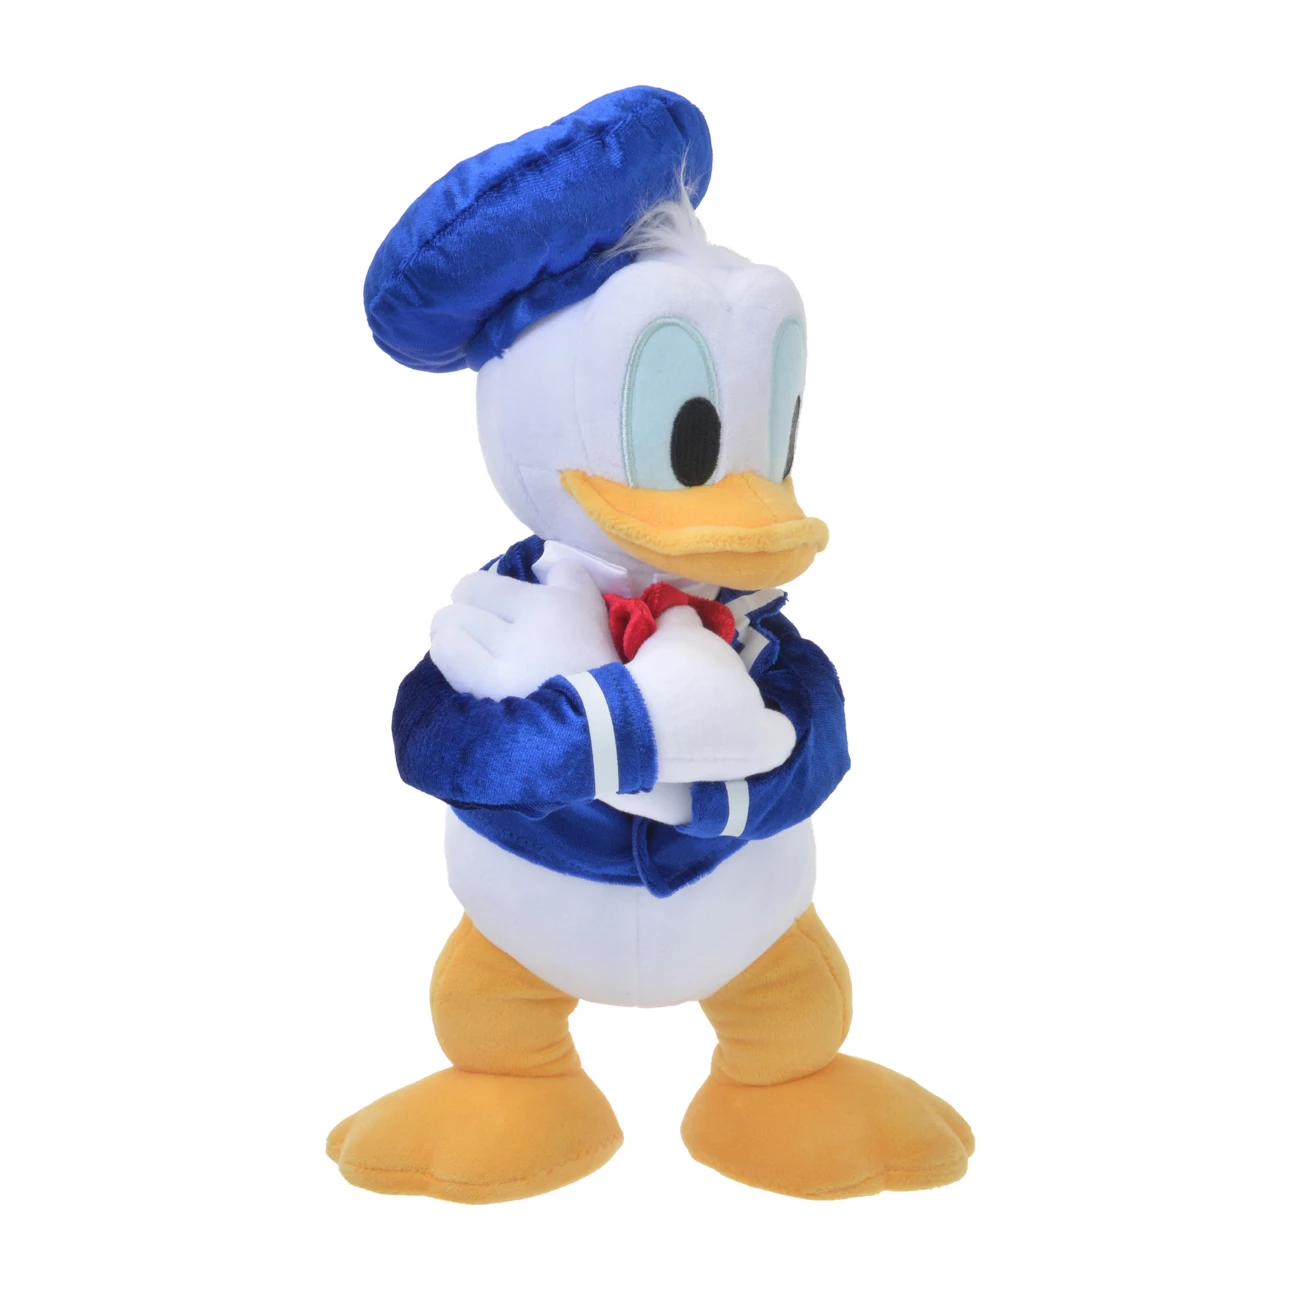 SDJ - DONALD DUCK IT'S MY STYLE Collection - Plush